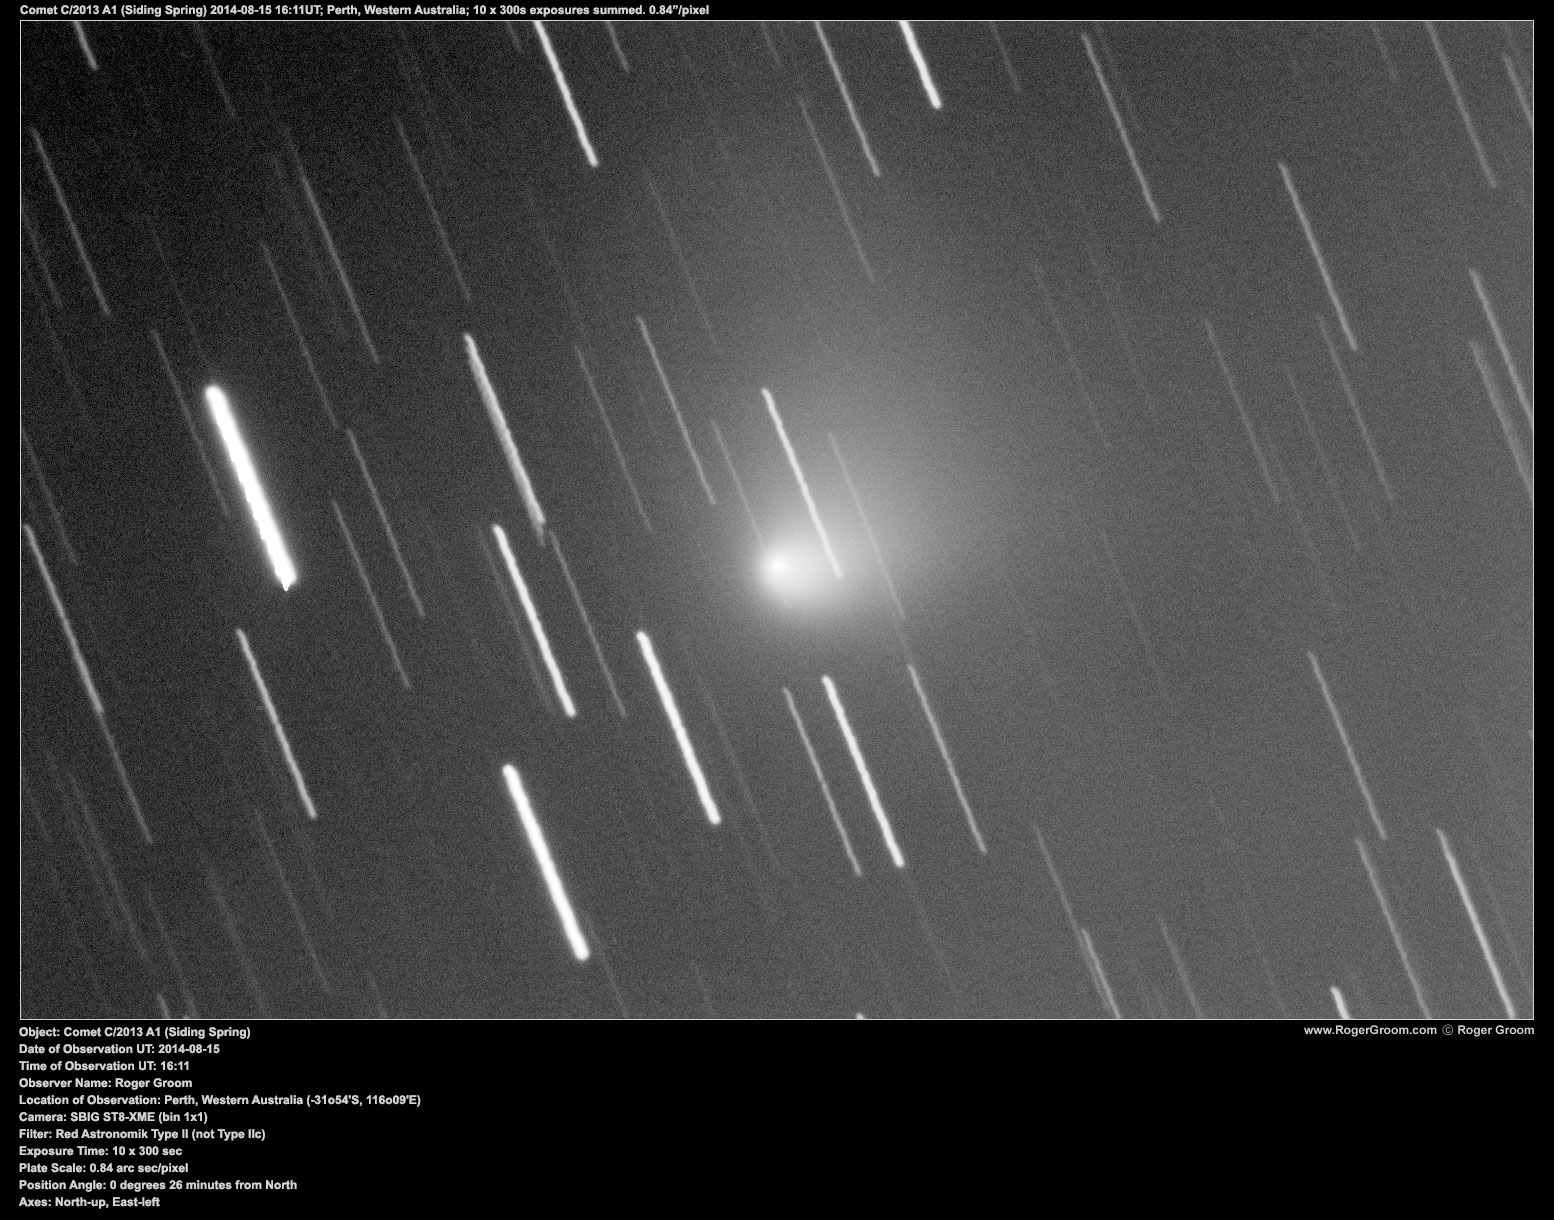 Object: Comet C/2013 A1 (Siding Spring) Date of Observation UT: 20140813 Time of Observation UT: 16:20:00 Observer Name: Roger Groom Location of Observation: Perth, Western Australia (-31o54'S, 116o09'E) Camera: SBIG ST8-XME (bin 1x1) Filter: Red Astronomik Type II (not Type IIc) Exposure Time: 10 x 300 sec (sumstacked) Plate Scale: 0.84 arc sec/pixel Position Angle: 0 degrees 26 minutes from North Axes: North-up, East-left